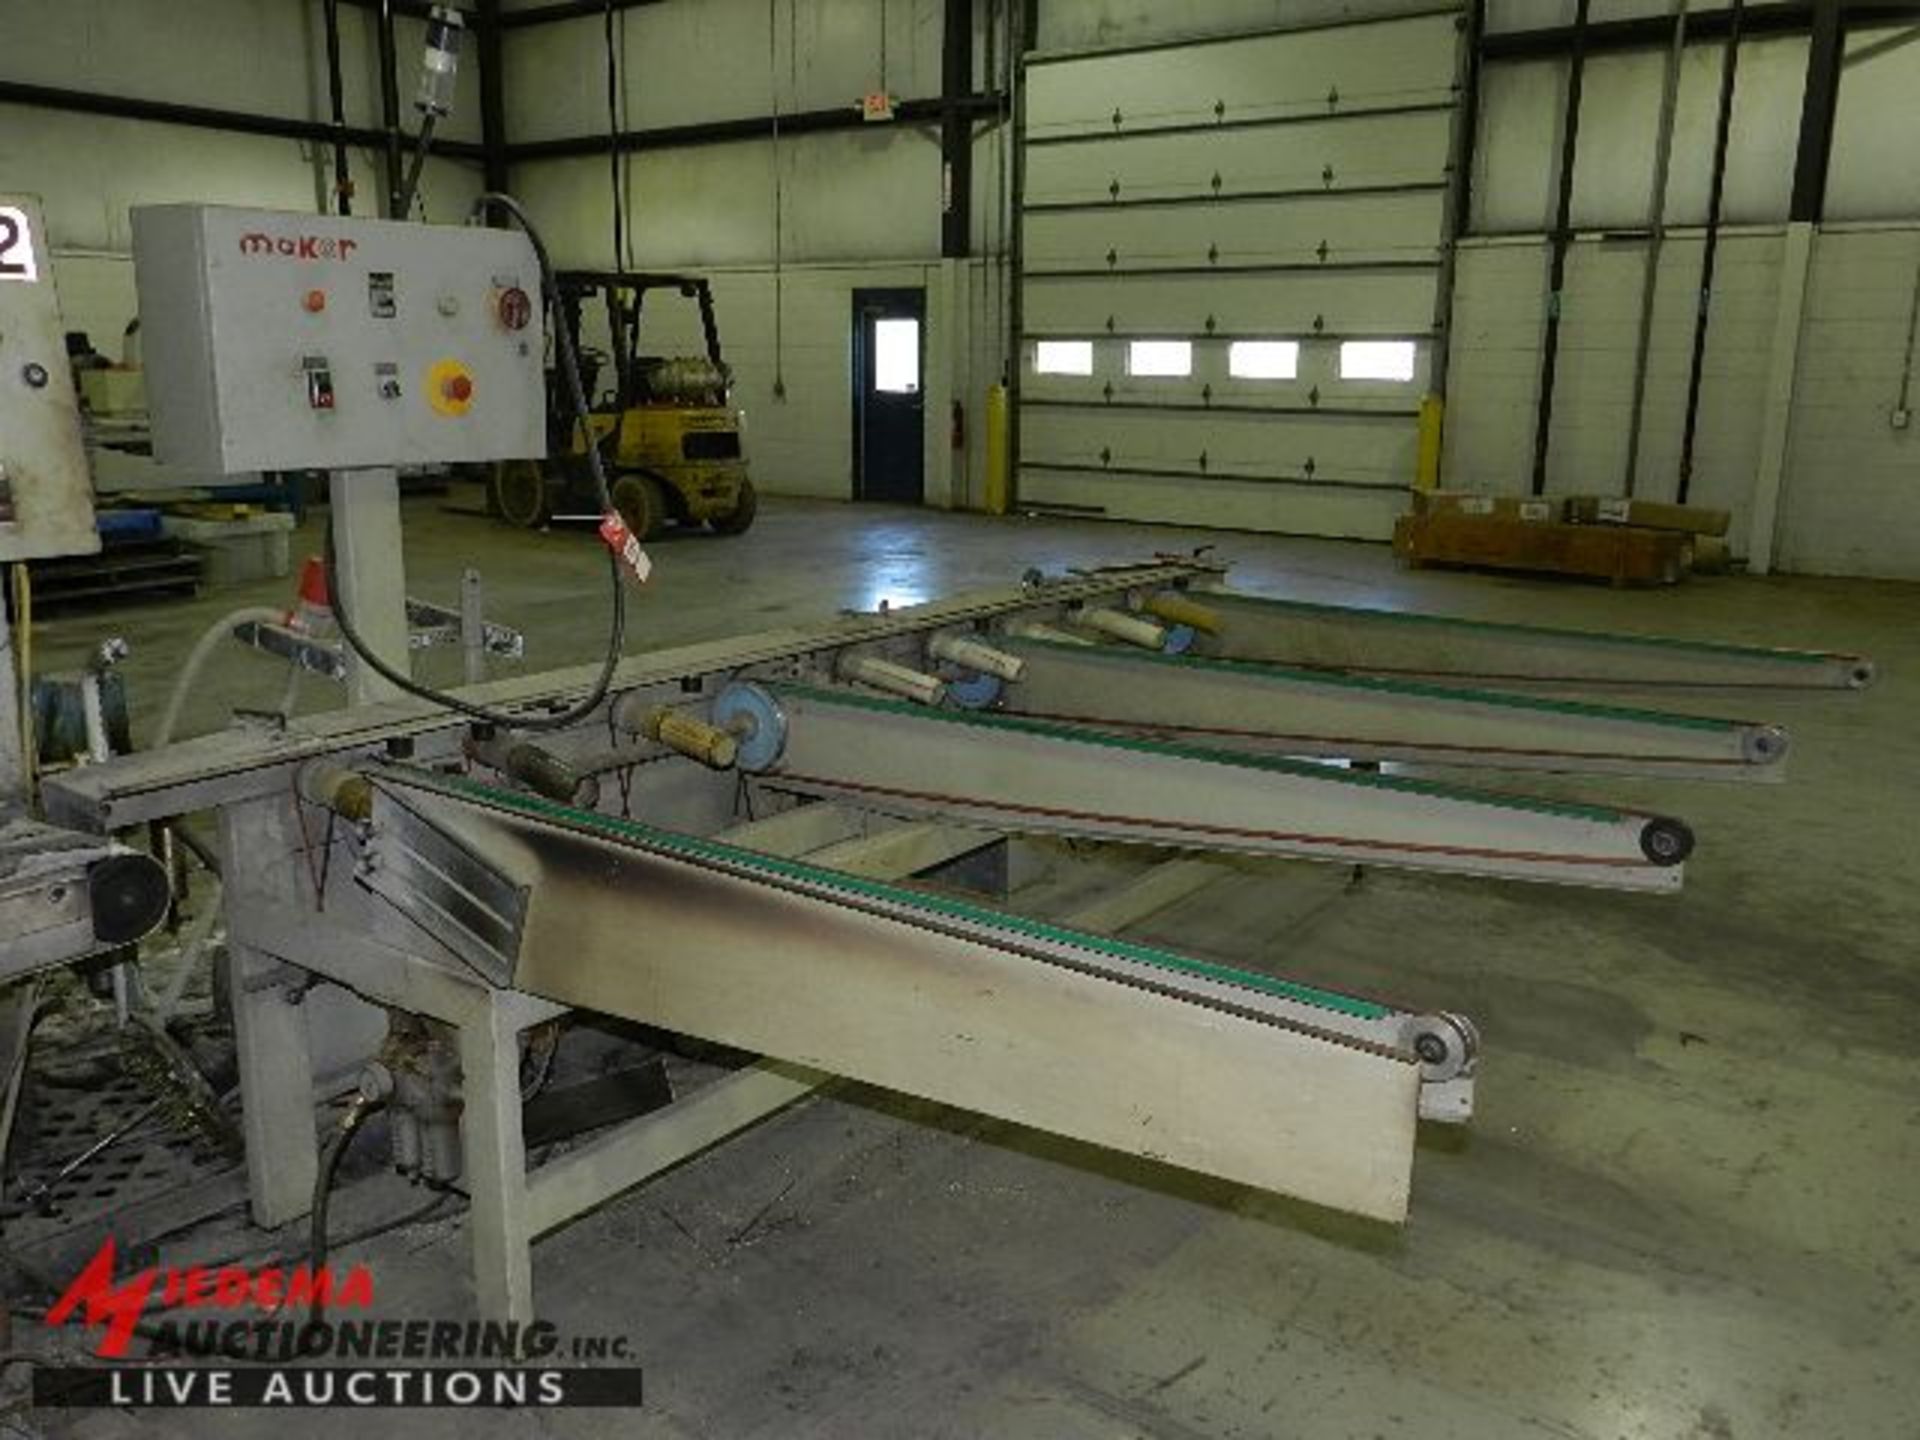 MAKOR C8 END FEED 10' TABLE, STACKER TABLE, 69" ARMS, APPROX 10' LENGTH